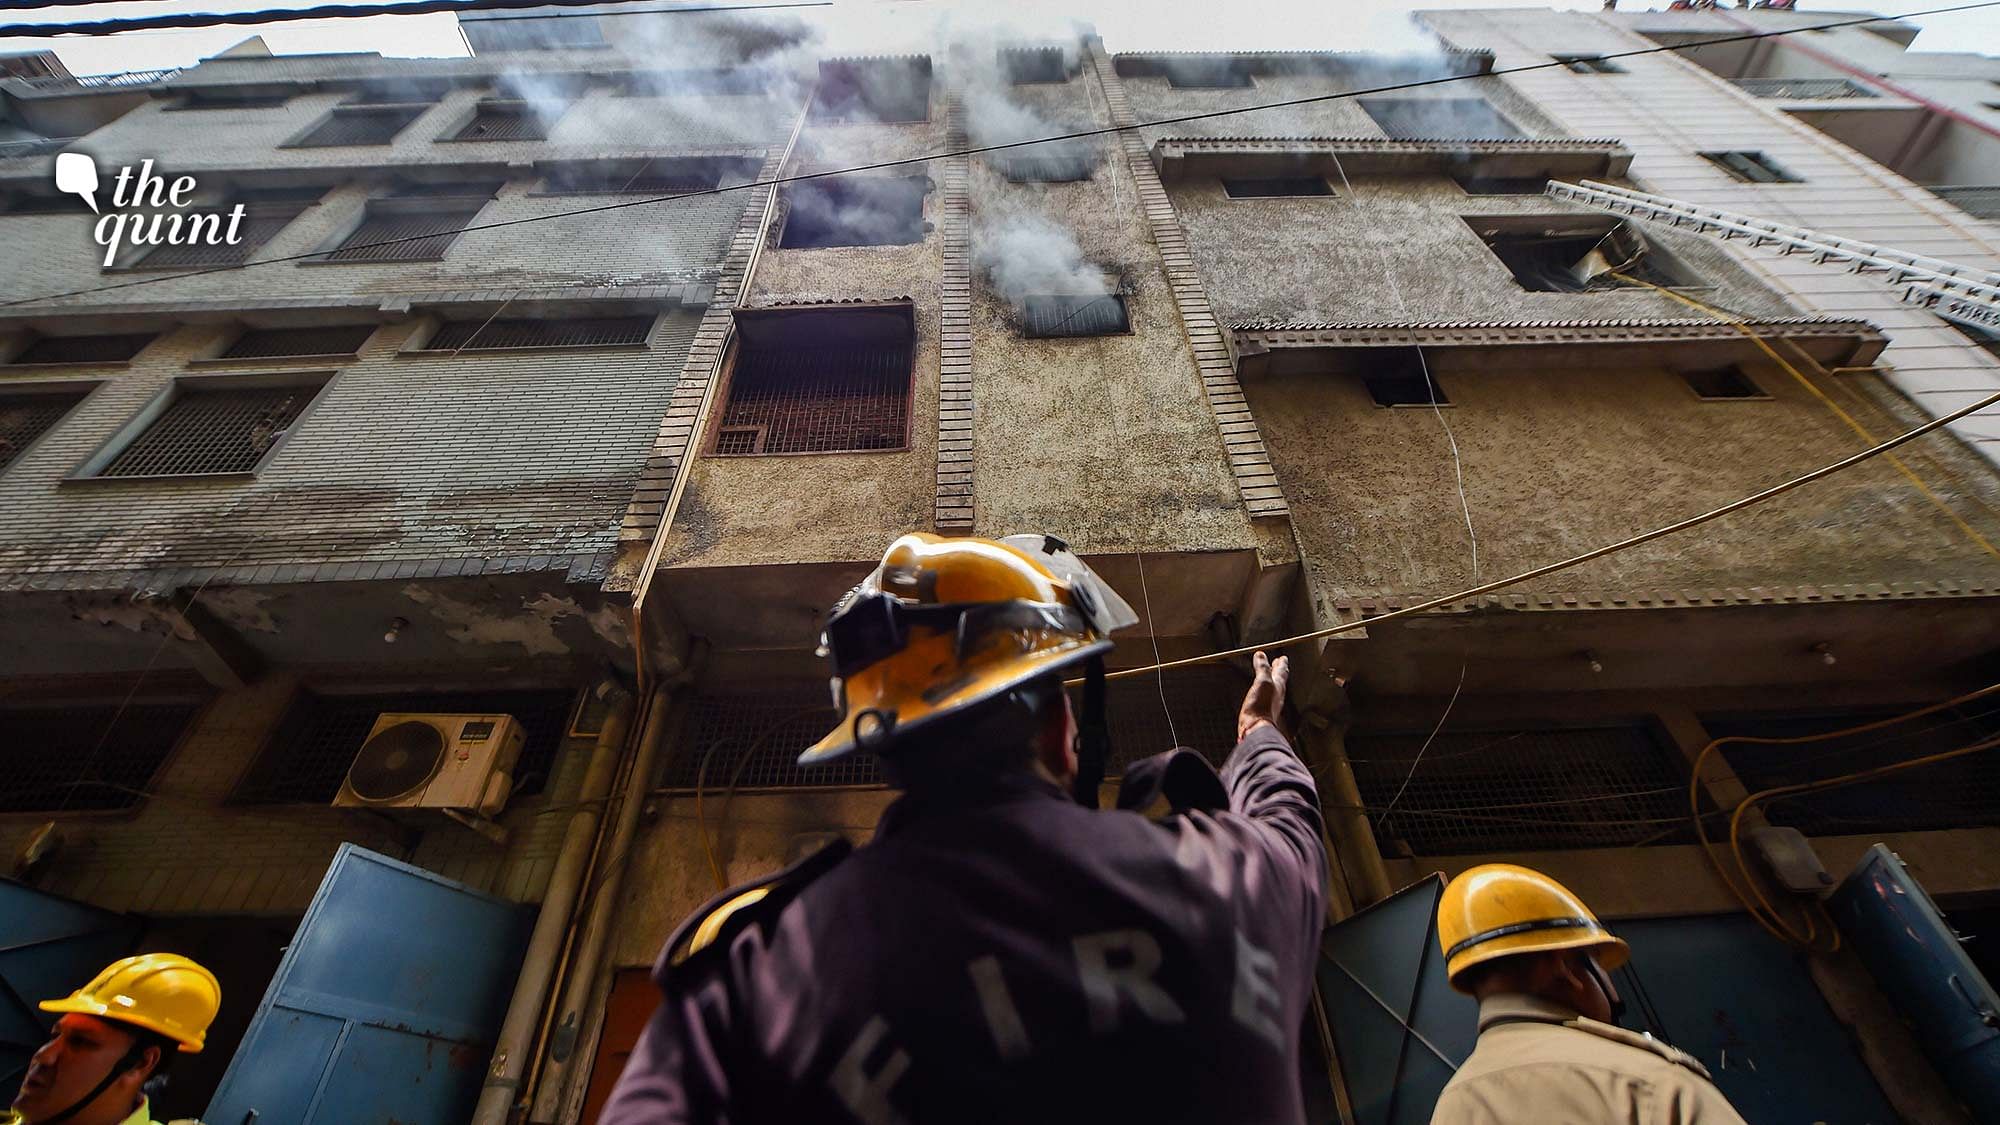 Delhi Fire at Anaj Mandi Factory: <b>The Quint</b> spoke to various stakeholders to understand the root cause behind the operation of illegal factories for years in Anaj Mandi, right under the nose of the government. After the massive fire that broke out on 8 December, government departments and police are blaming each other for the tragedy. 